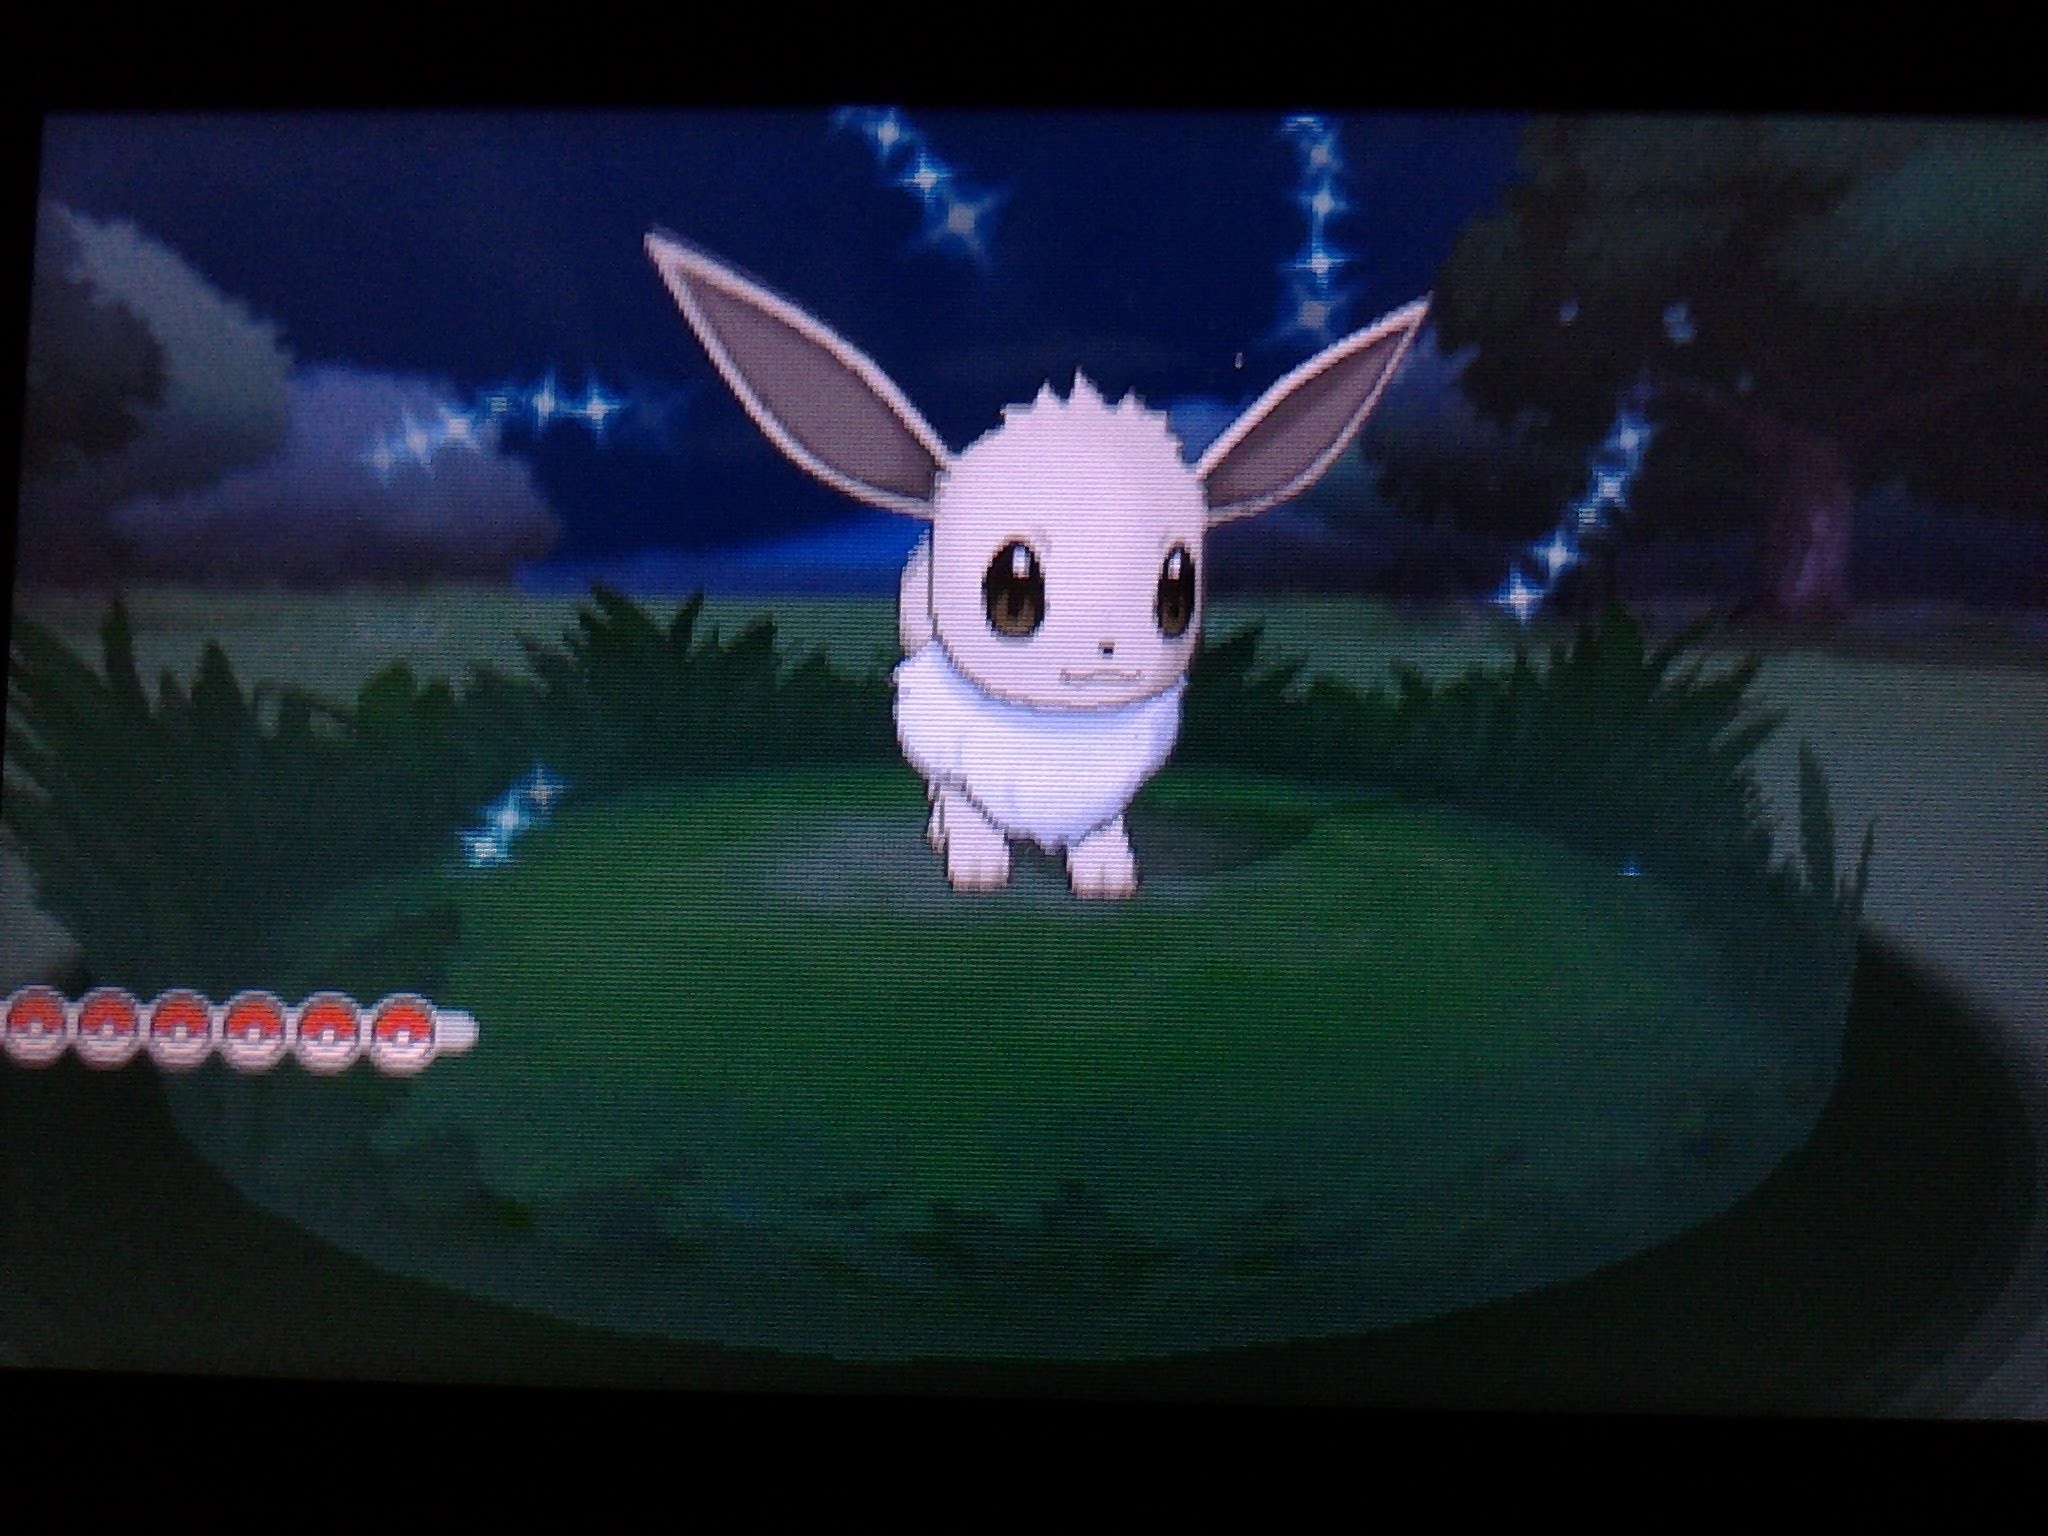 2048x1536 Live shiny Eevee after only 40 REs!